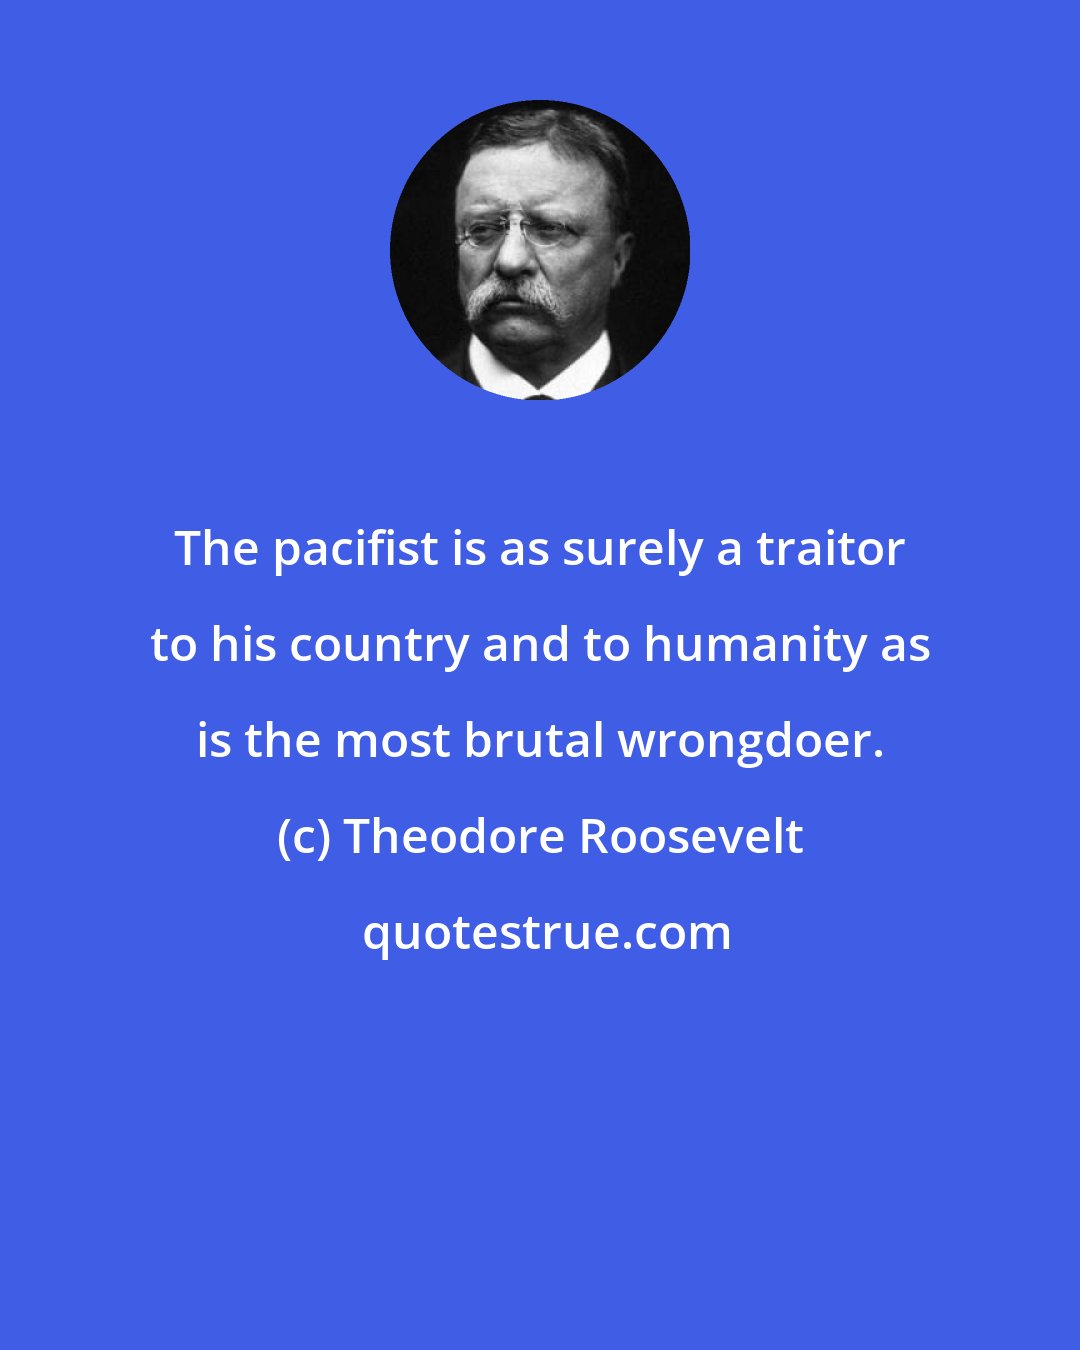 Theodore Roosevelt: The pacifist is as surely a traitor to his country and to humanity as is the most brutal wrongdoer.